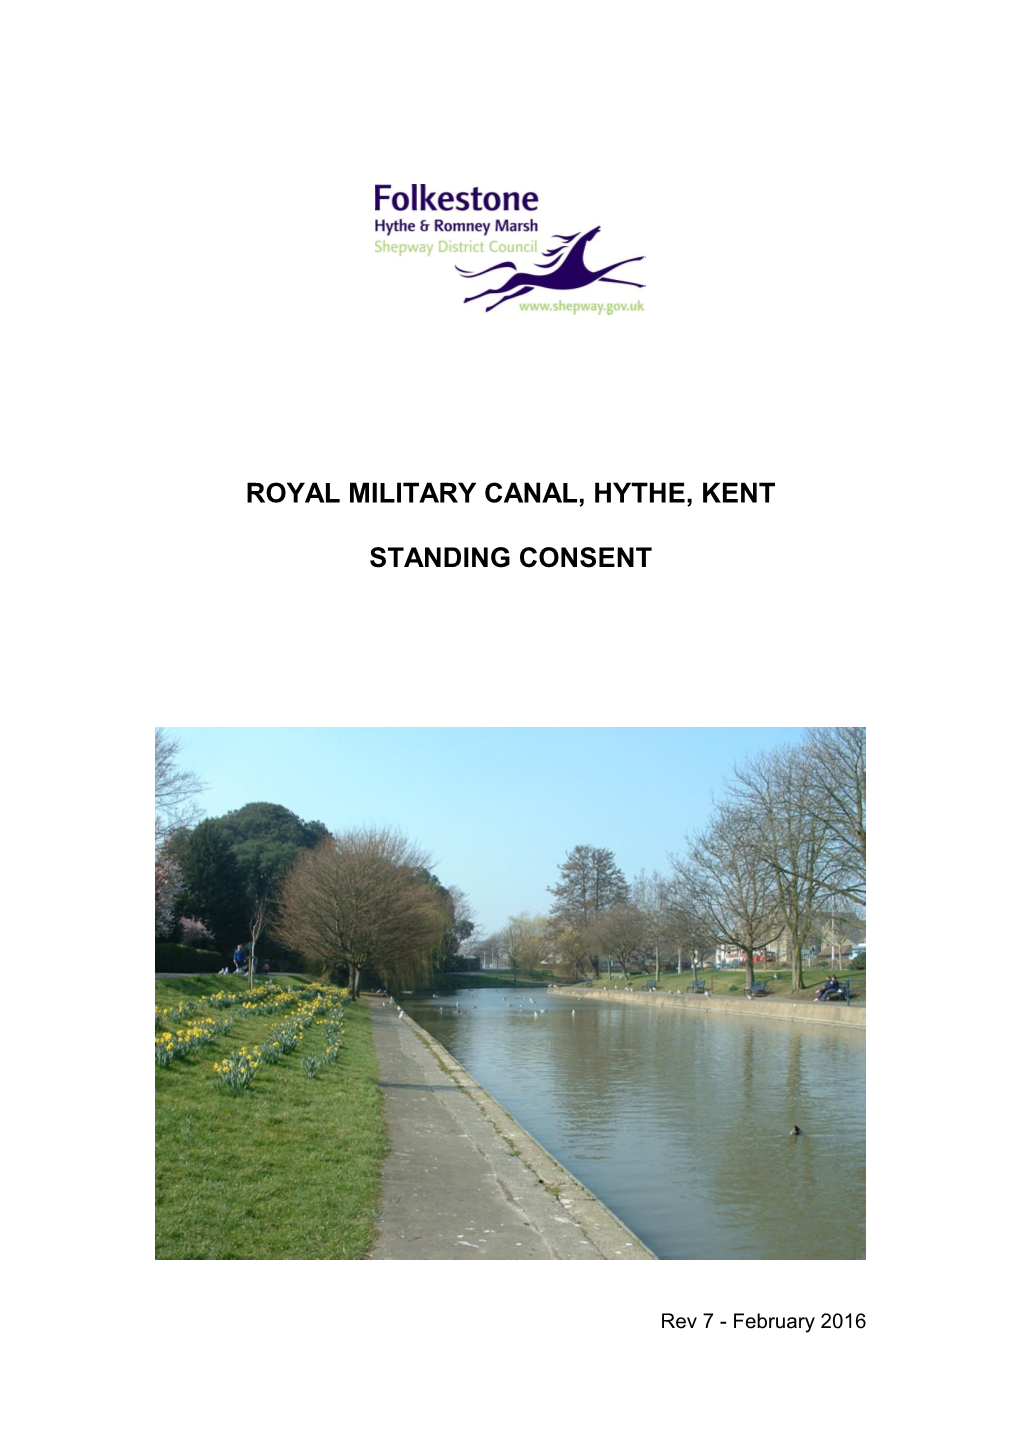 Royal Military Canal, Hythe, Kent Standing Consent